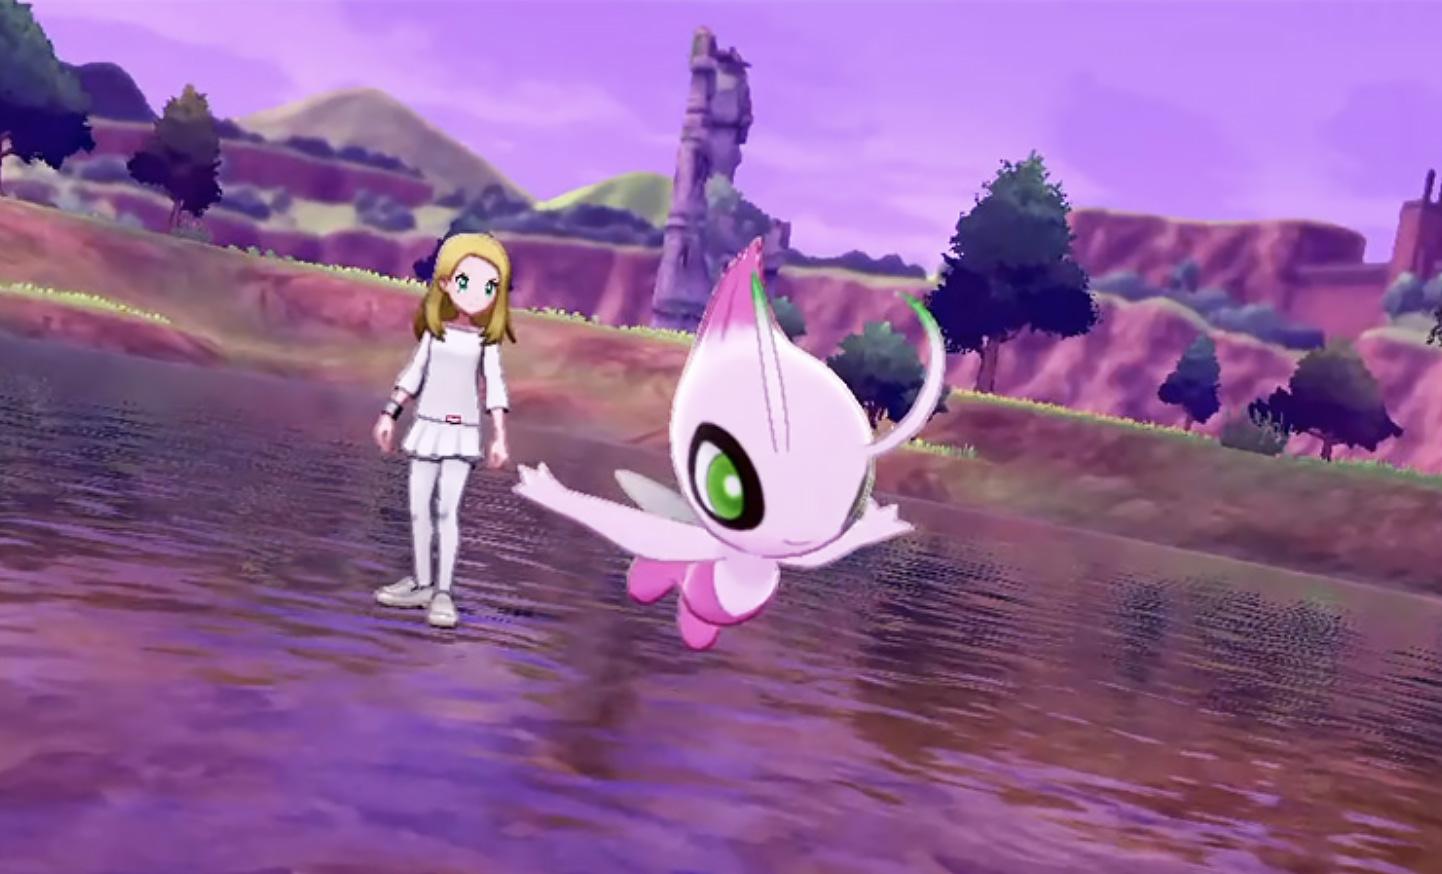 Pokemon Sword and Shield: How to get a free Dada Zarude and Shiny